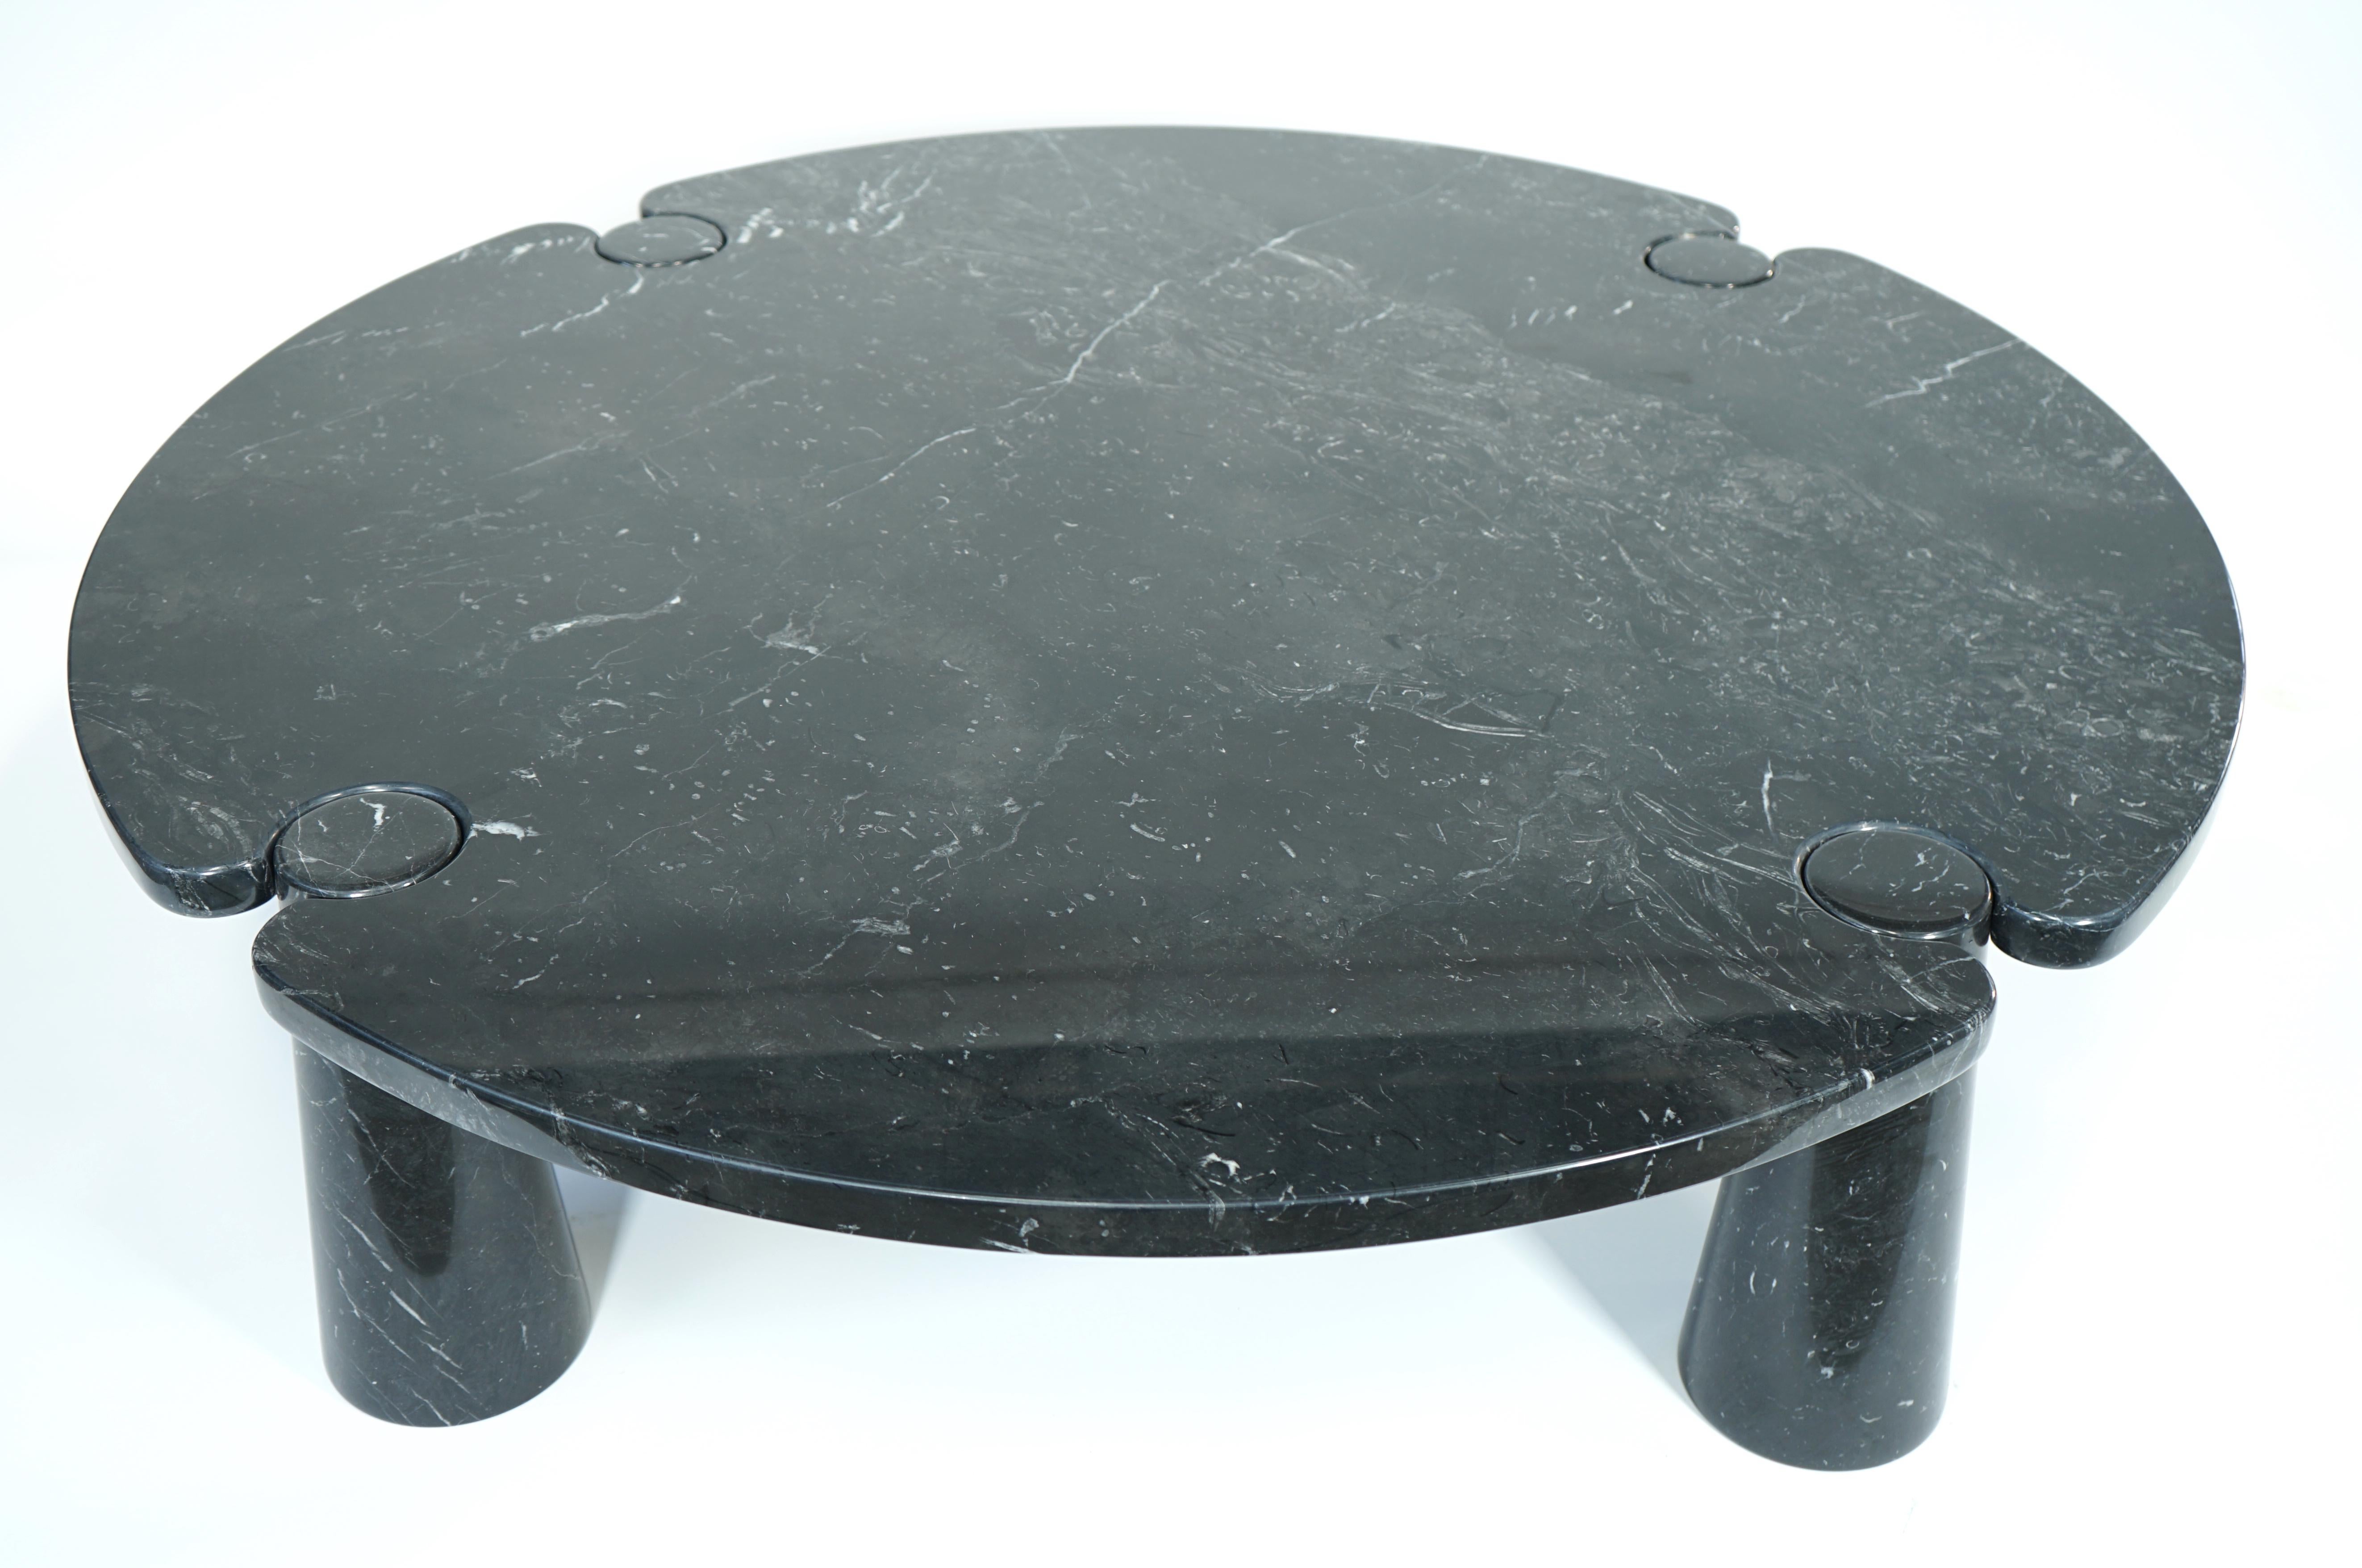 Eros black marble table designed by Algelo Mangiarotti and produced by Skipper in 1970.